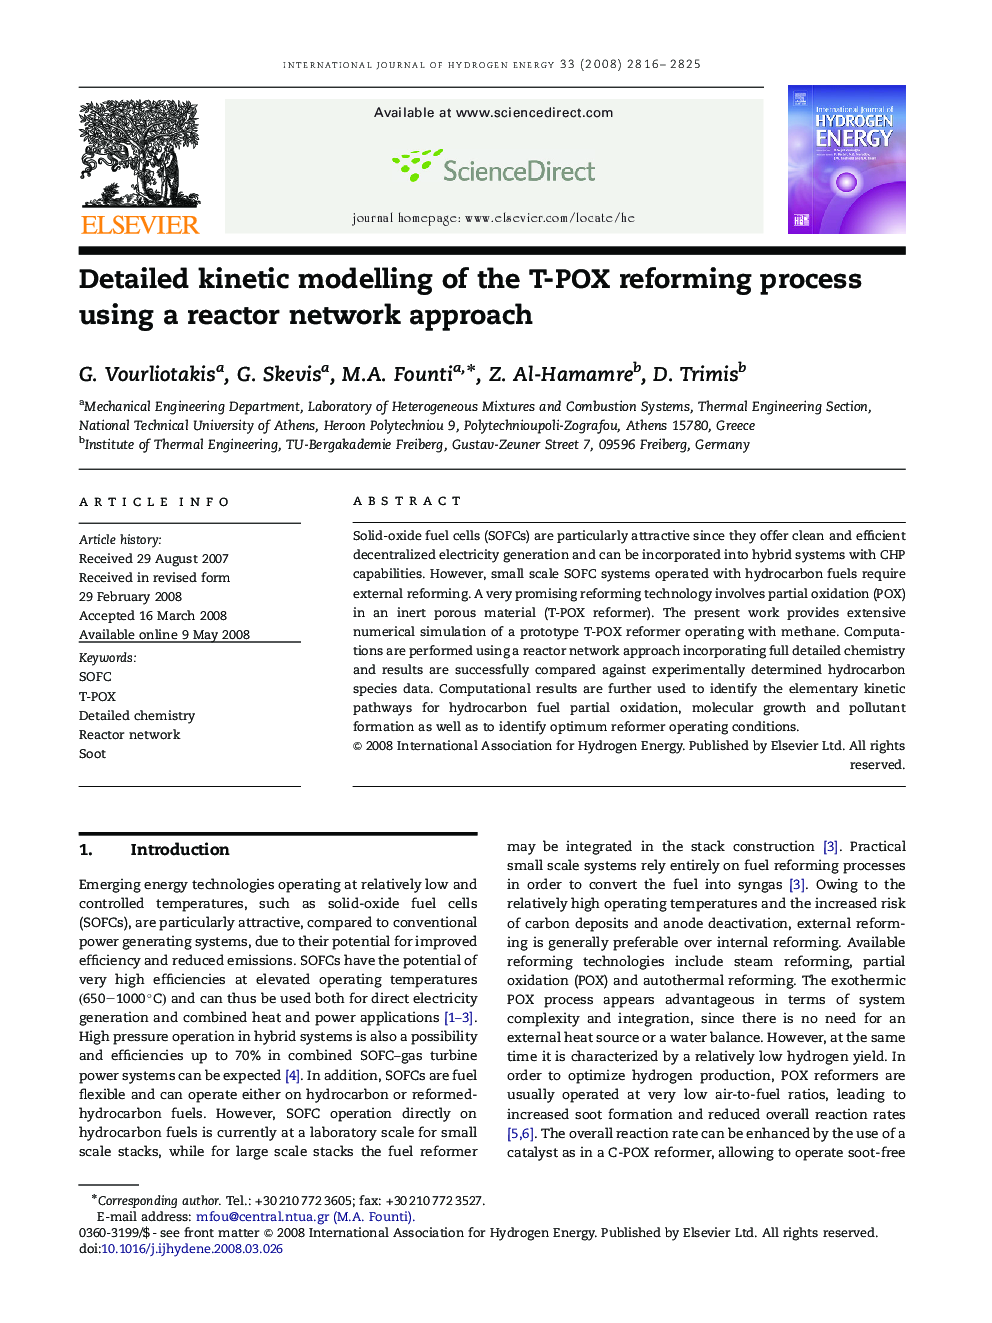 Detailed kinetic modelling of the T-POX reforming process using a reactor network approach